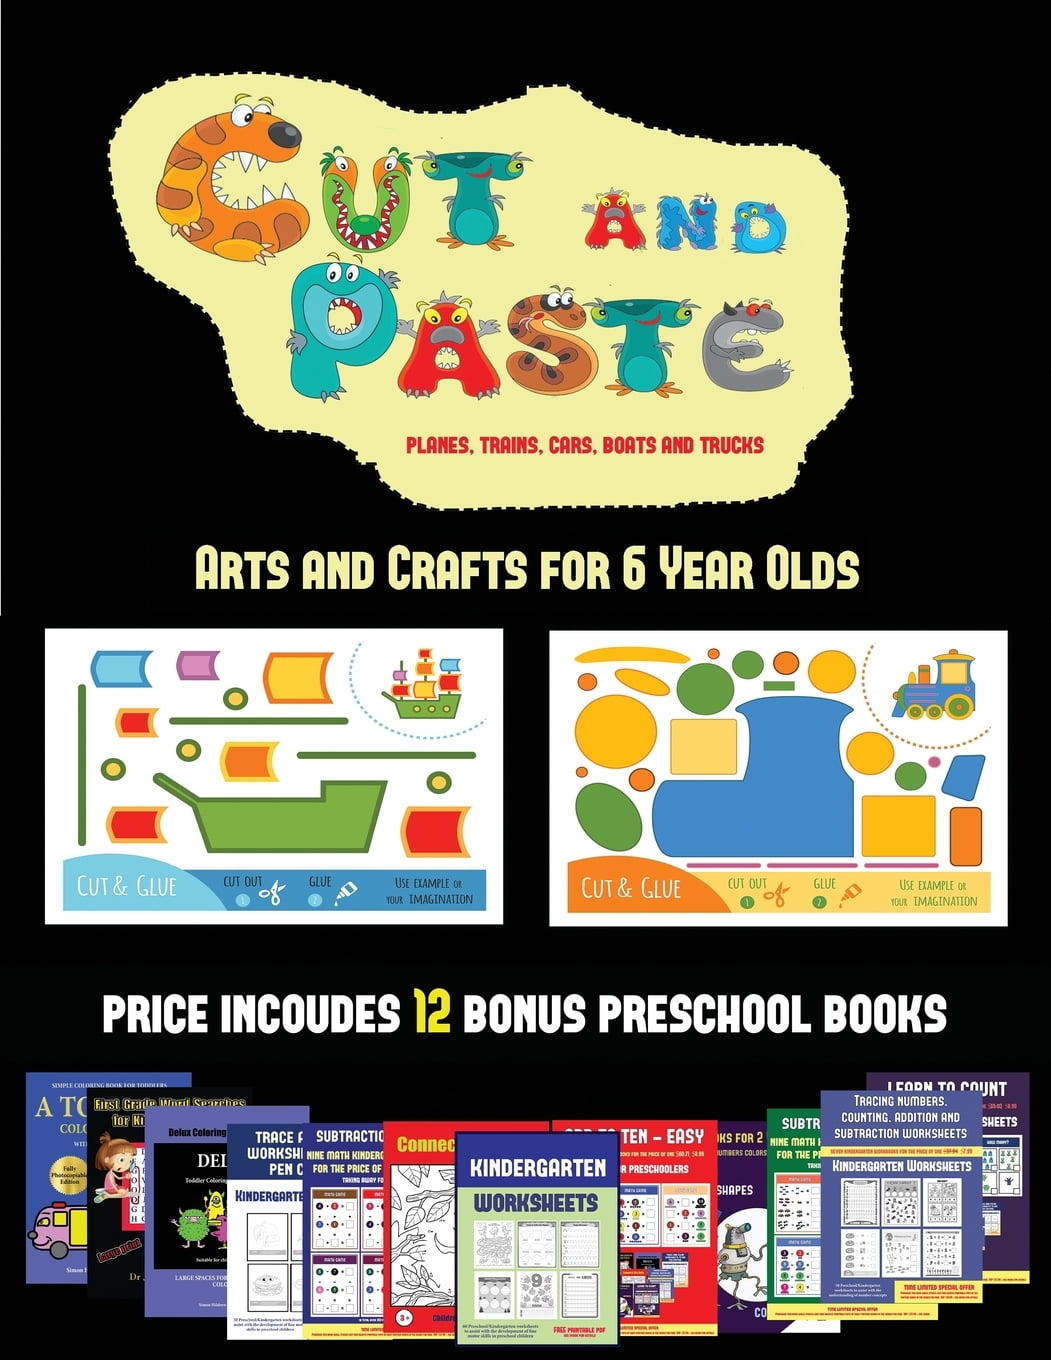 arts-and-crafts-for-6-year-olds-arts-and-crafts-for-6-year-olds-cut